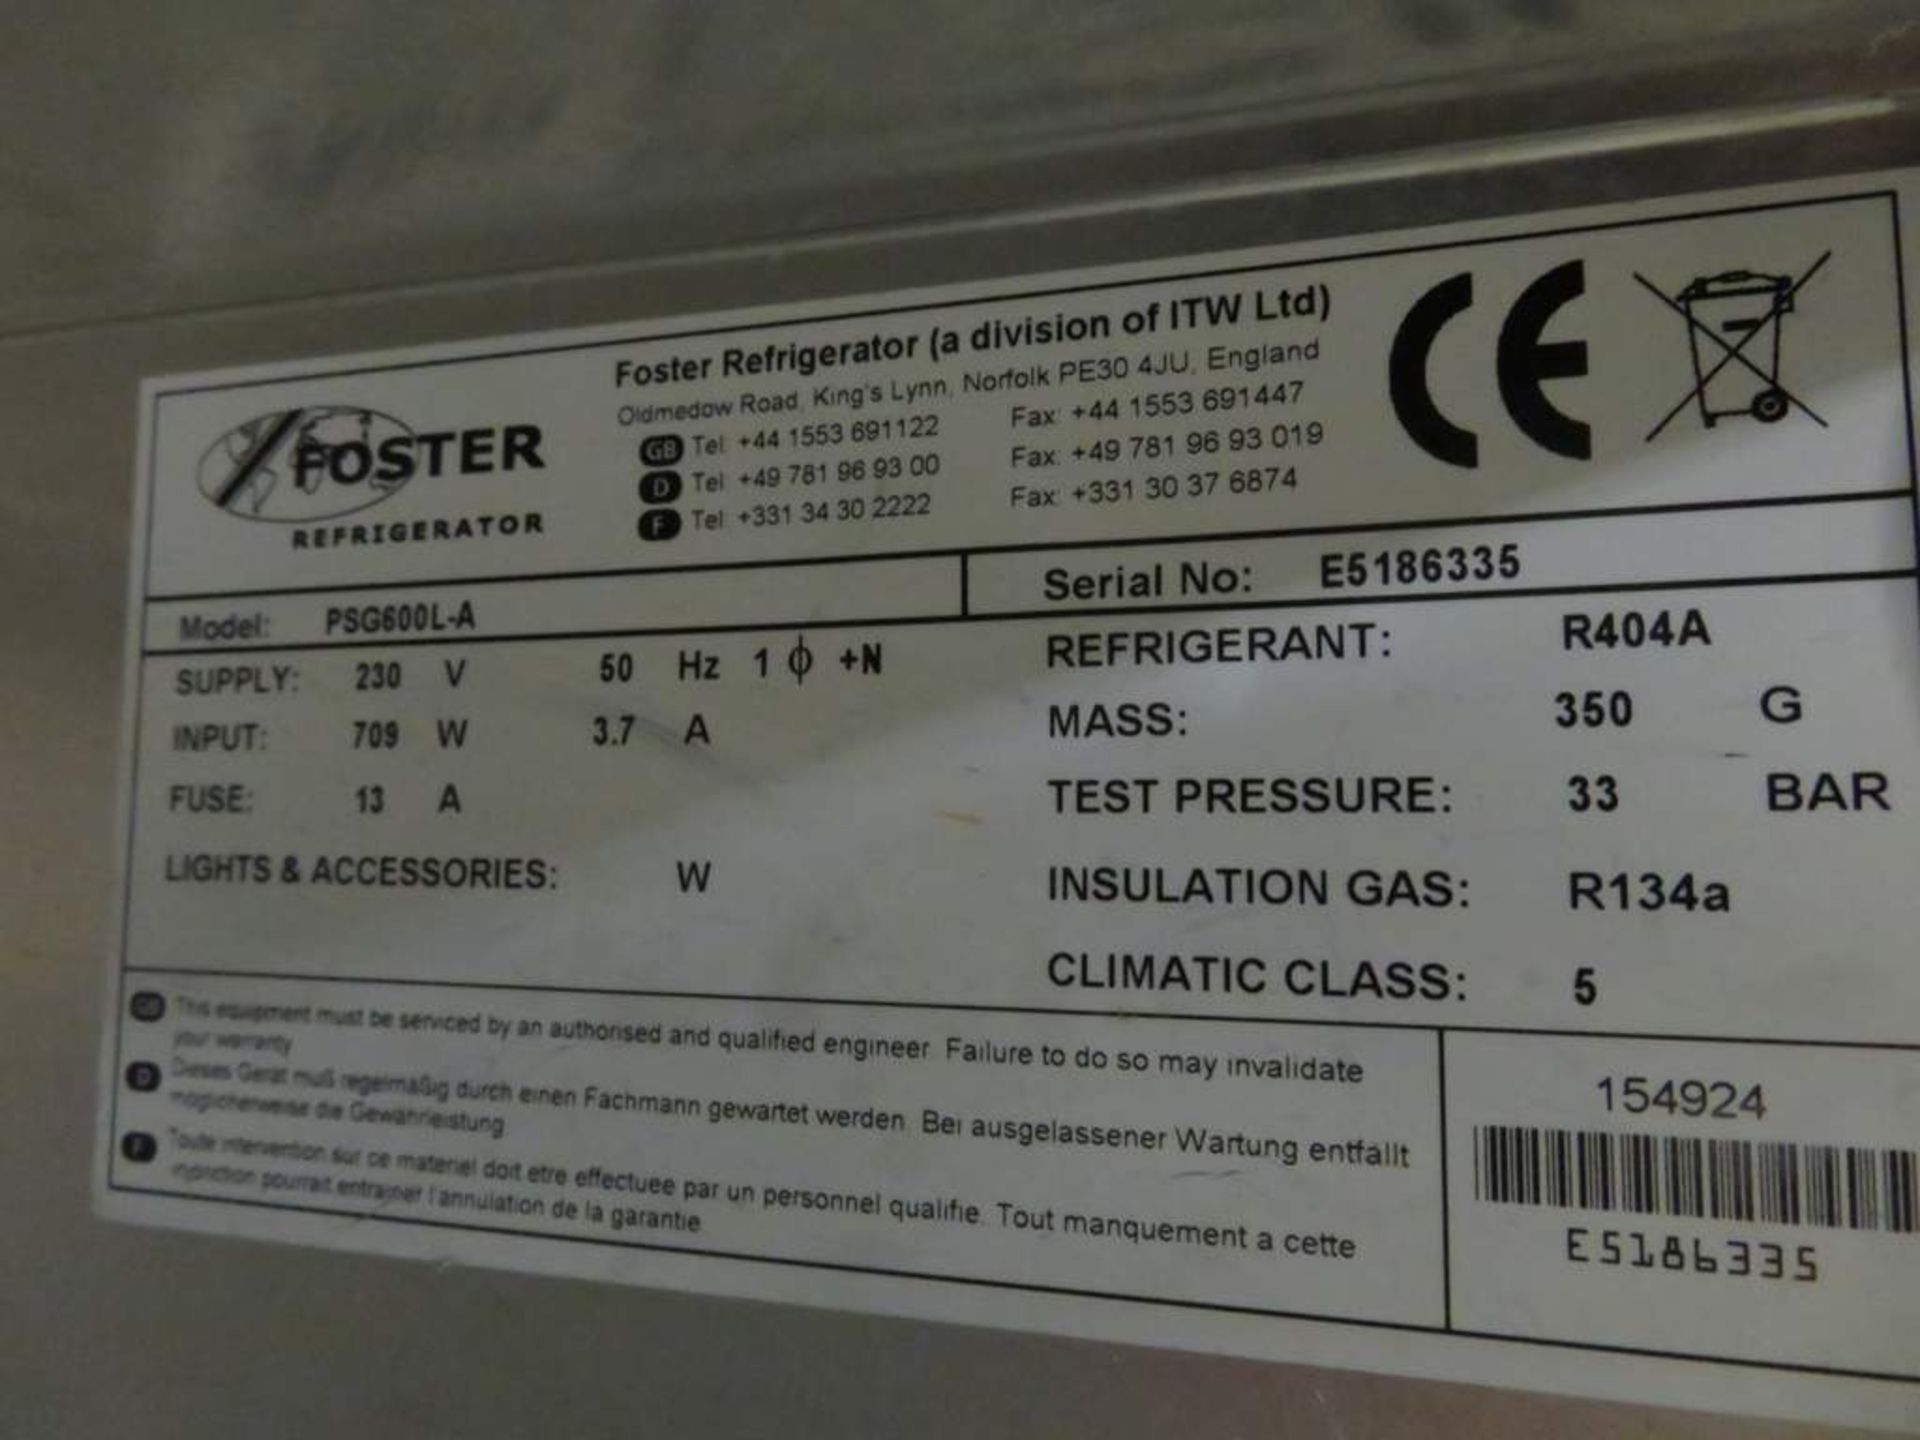 Foster PSG600LA stainless steel freezer - E5186336 - Image 4 of 6